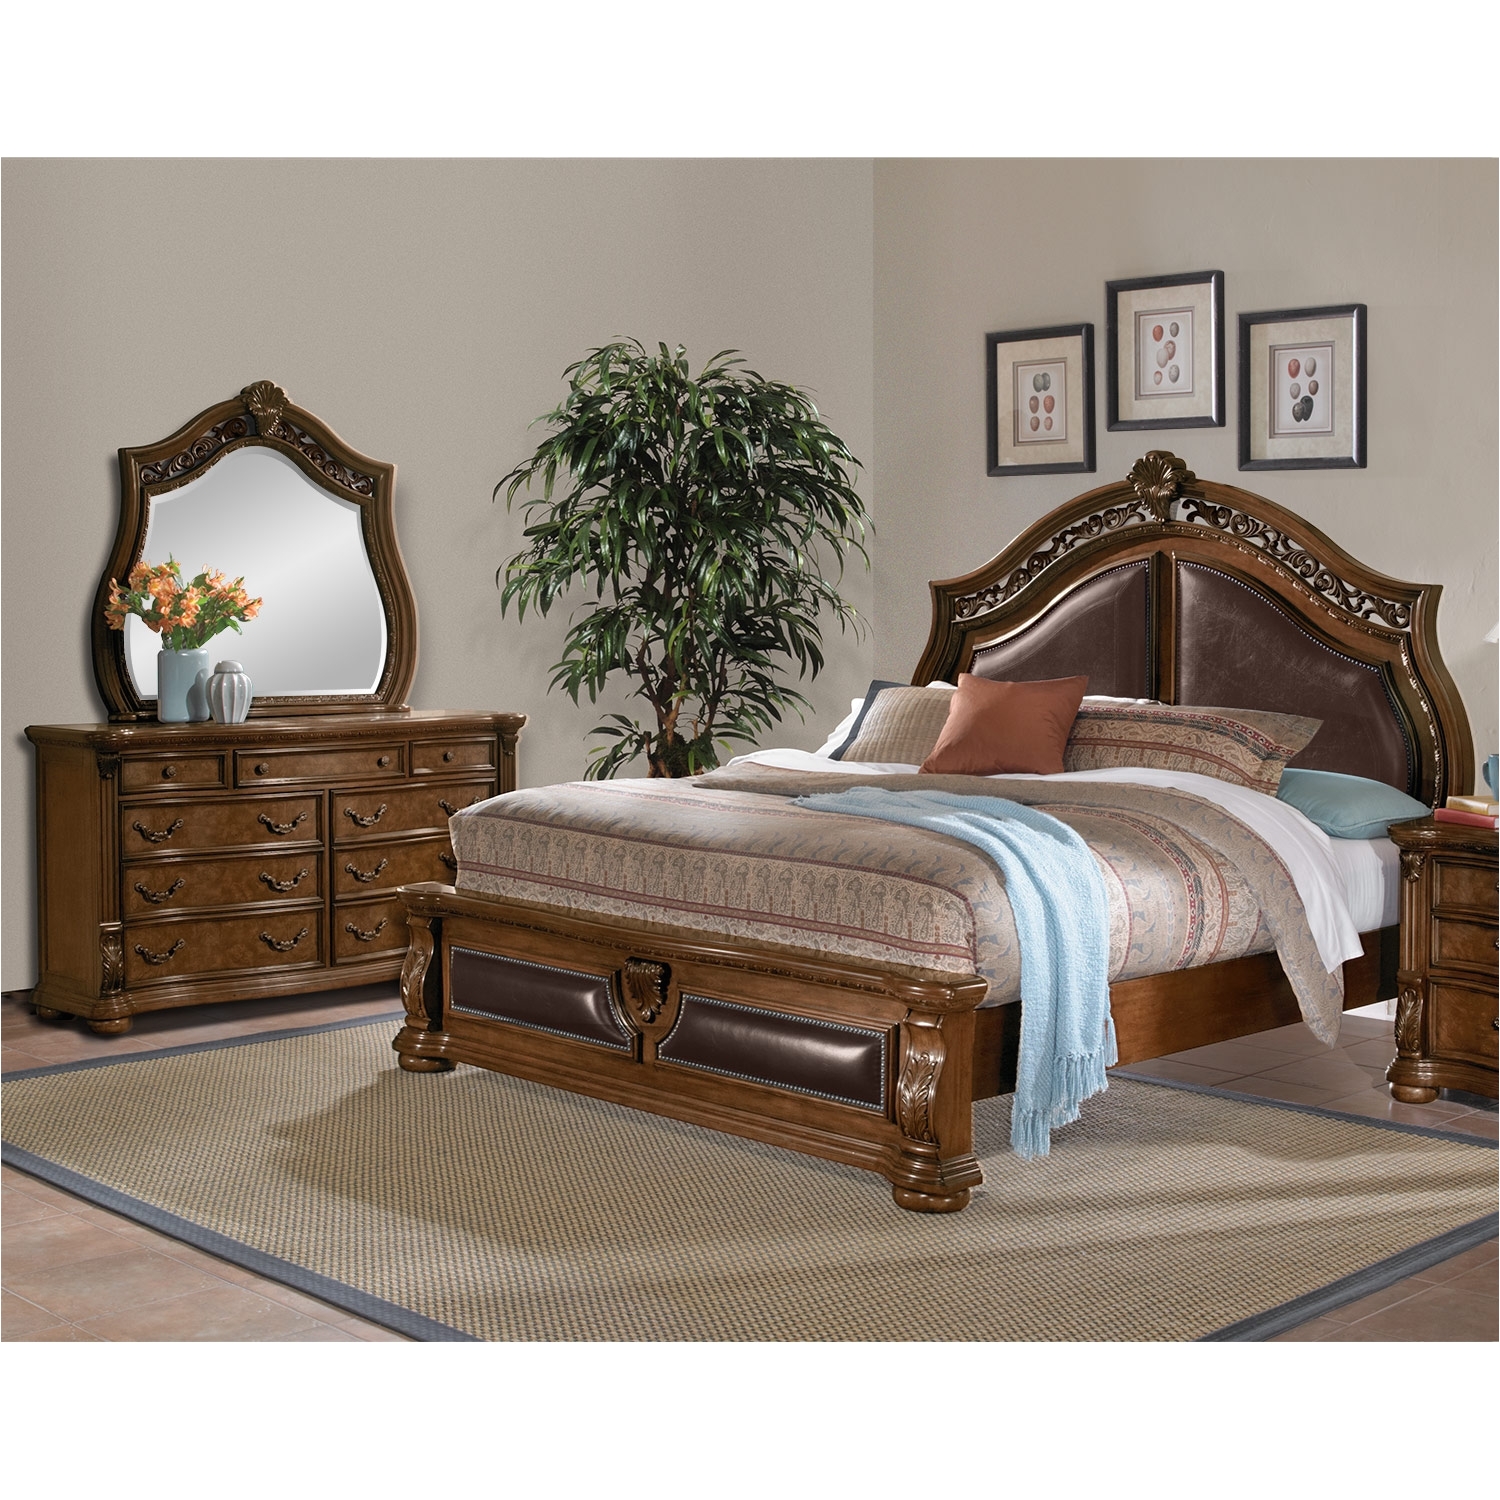 remodell your design a house with great fresh value city furniture bedroom sets and become perfect